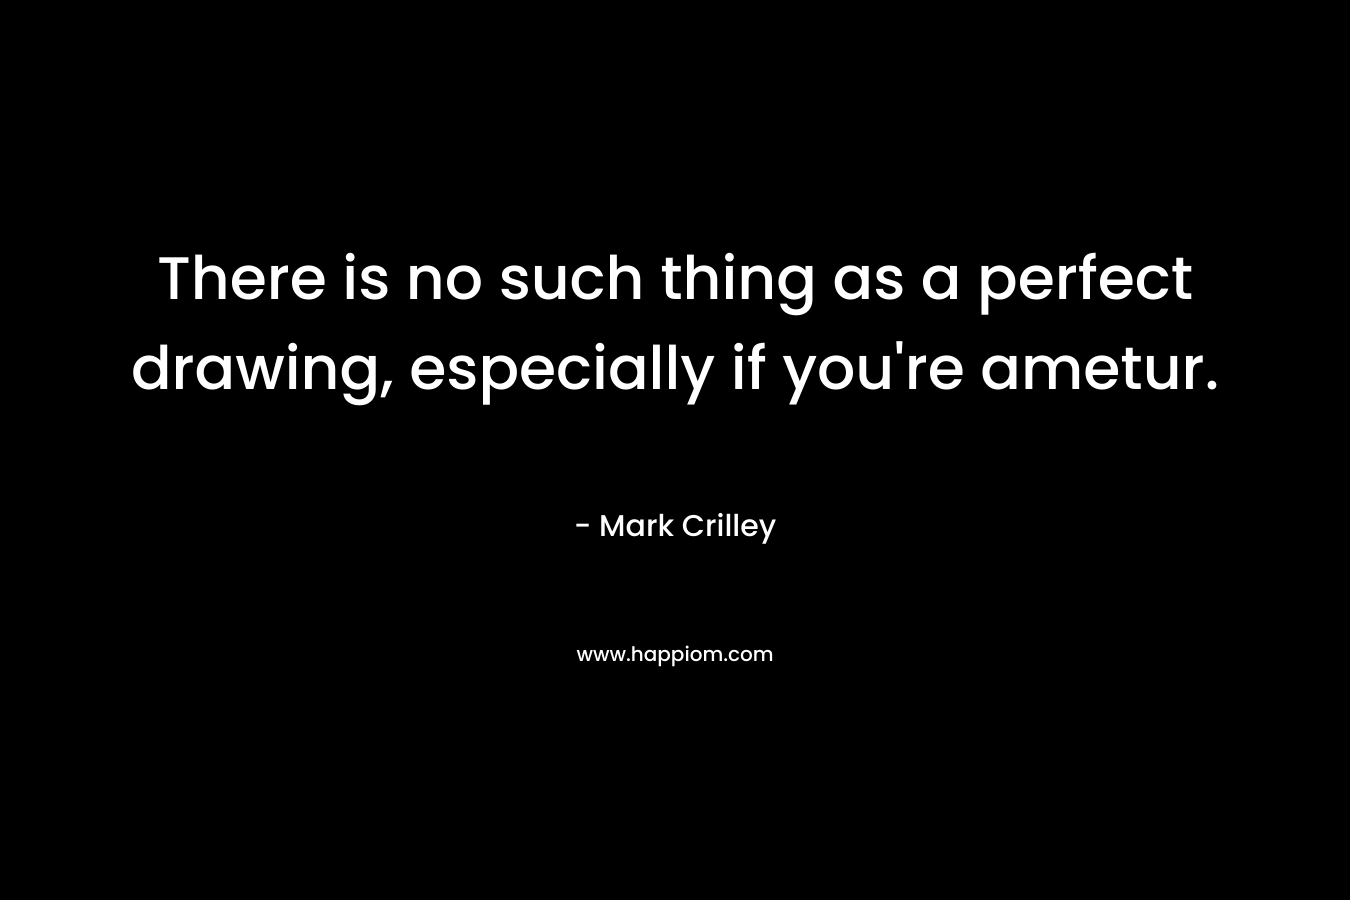 There is no such thing as a perfect drawing, especially if you’re ametur. – Mark Crilley